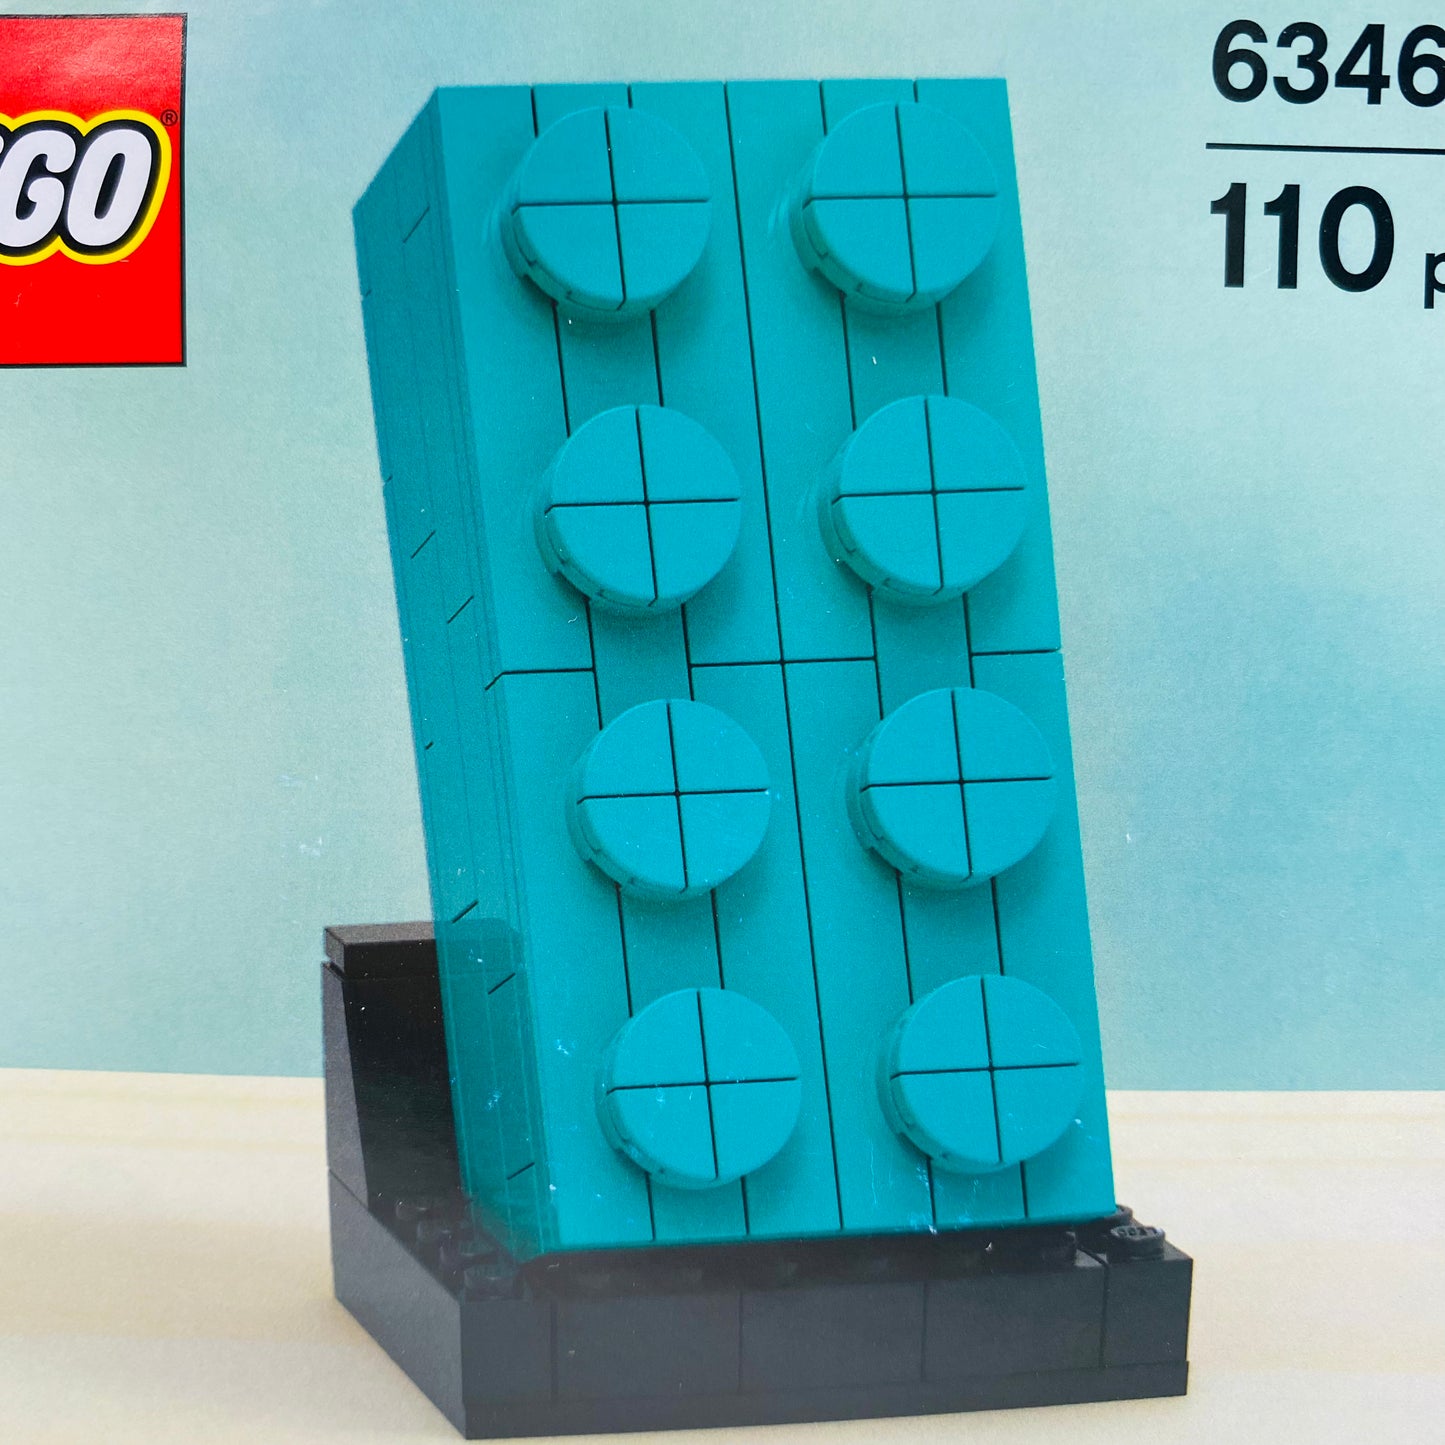 LEGO Buildable 2x4 Teal Brick boxed set (2020) 6346101